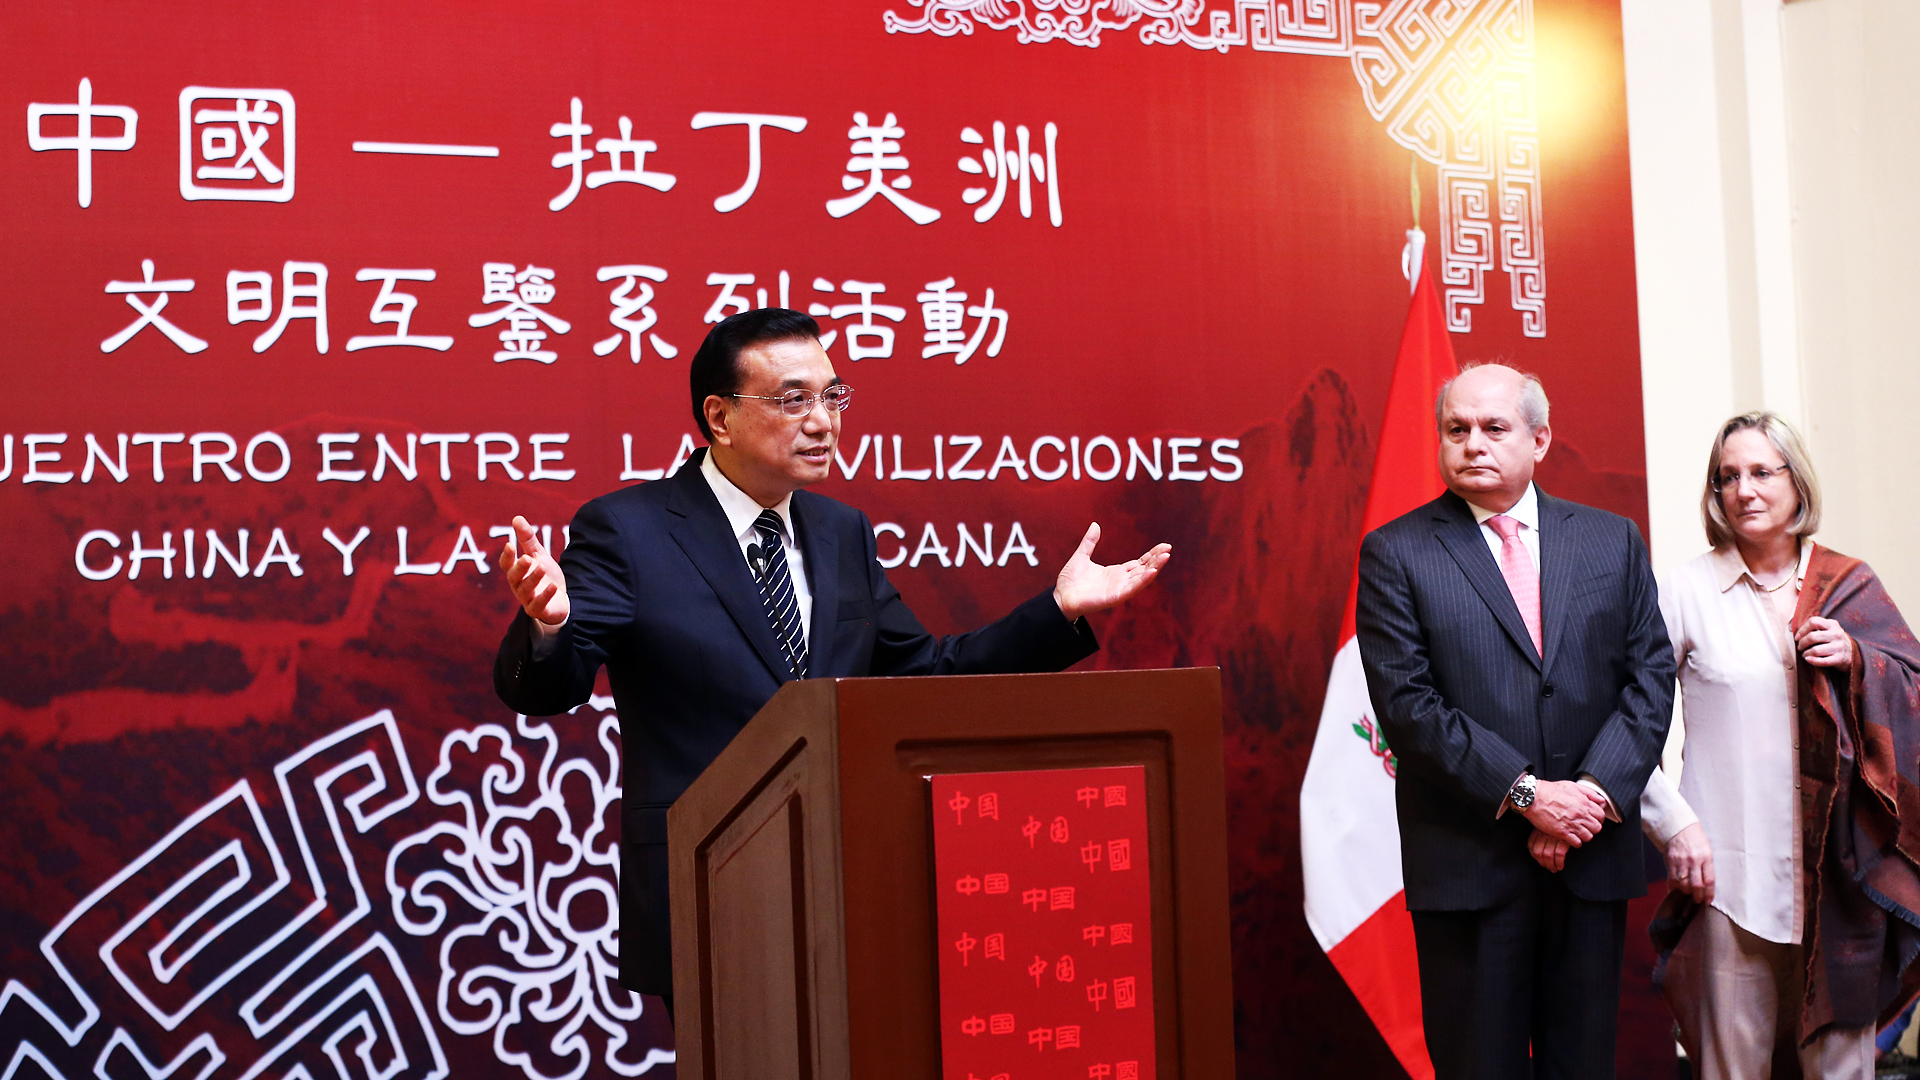 Premier Li Keqiang says Beijing will strengthen its ties with Peru to better facilitate Chinese companies. Photo: Xinhua